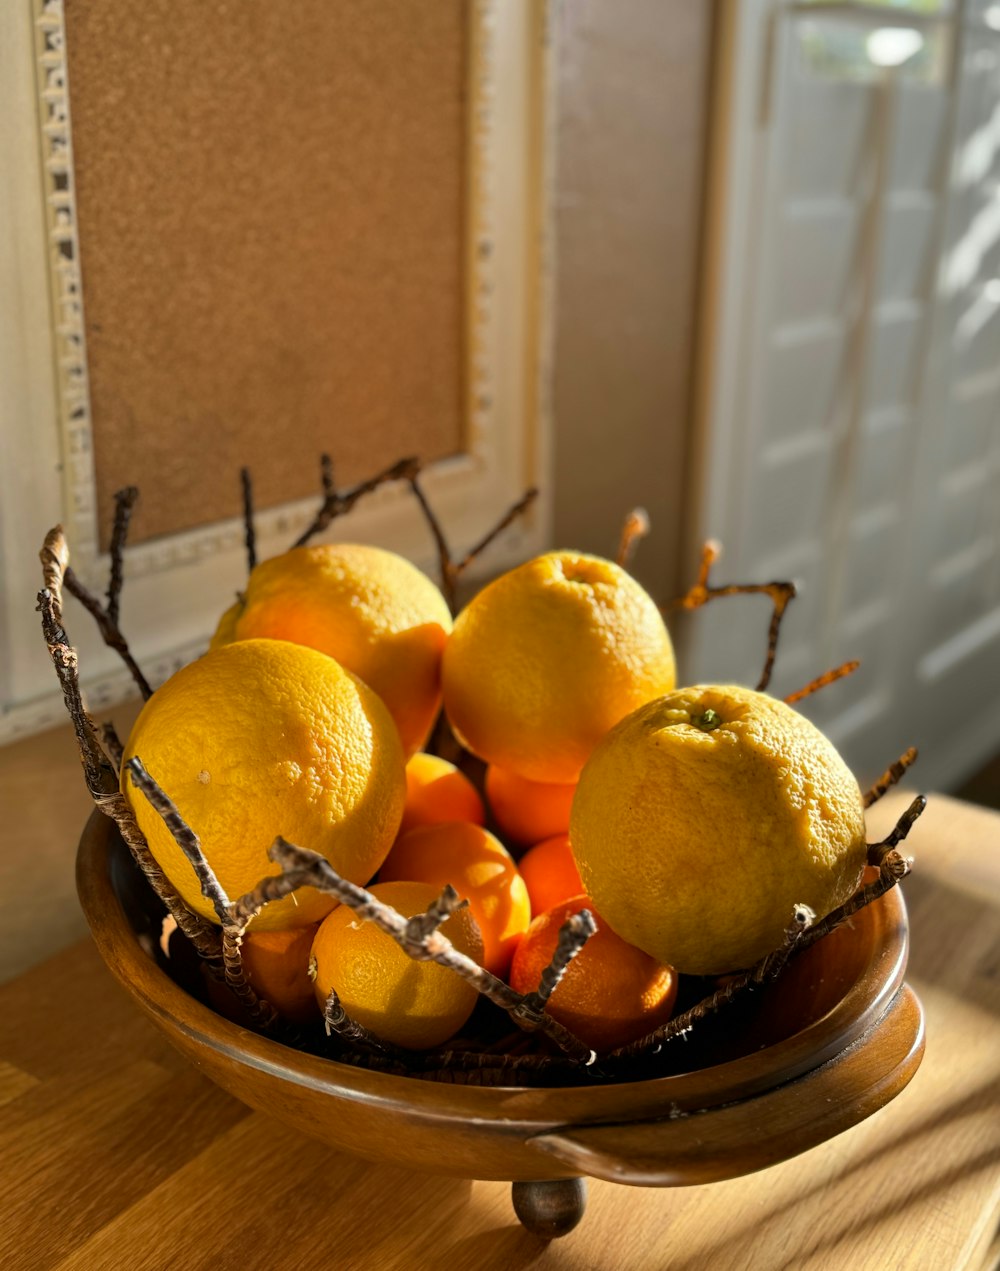 a bowl filled with oranges and lemons on a table